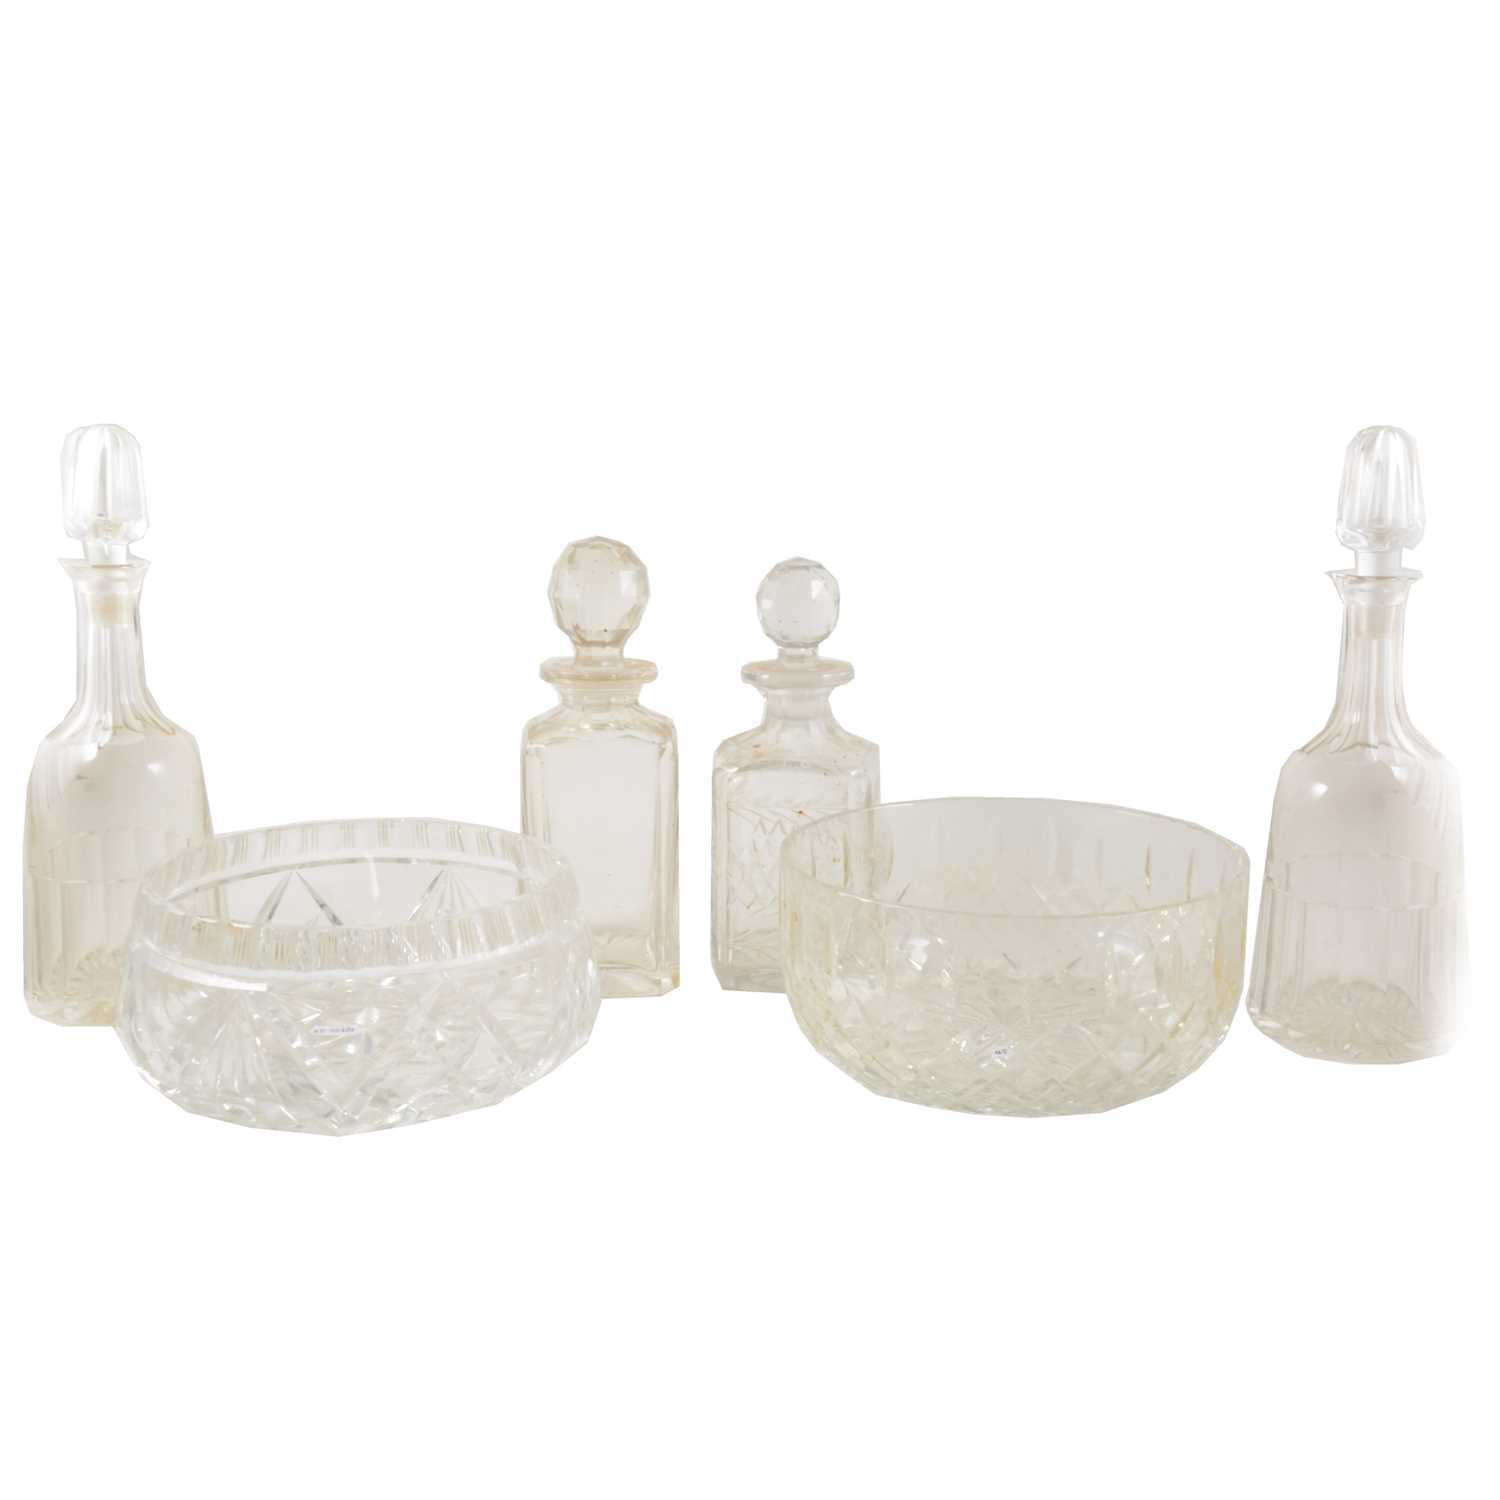 Lot 27 - Pair of cut-glass mallet shaped decanters, spirit decanters, and fruit bowls